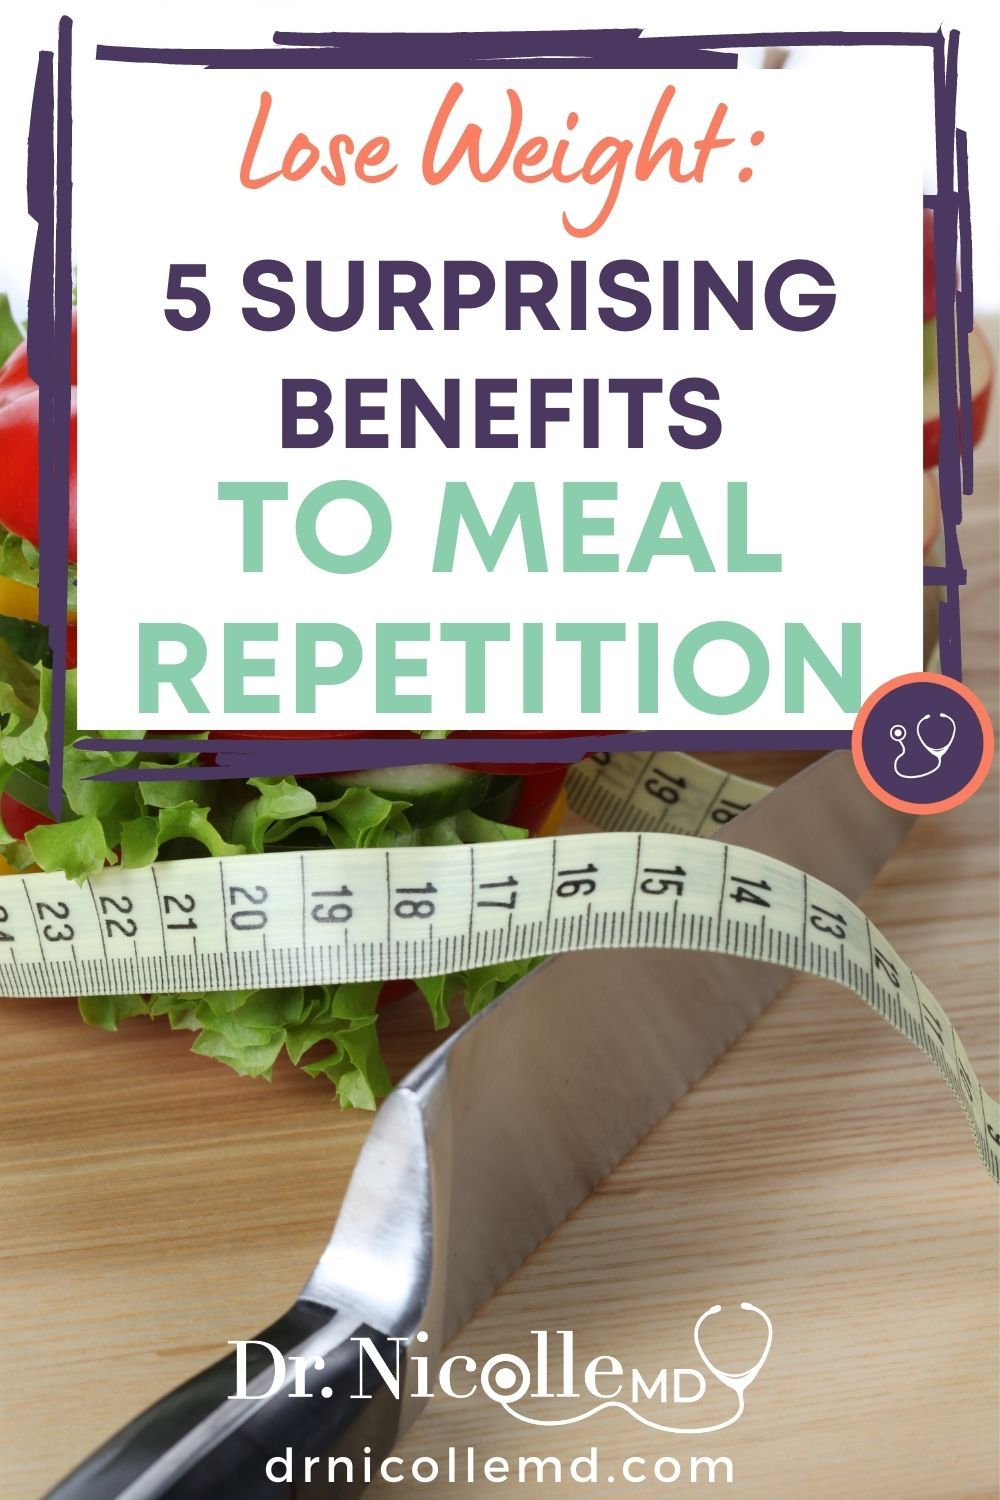 Lose Weight: 5 Surprising Benefits to Meal Repetition